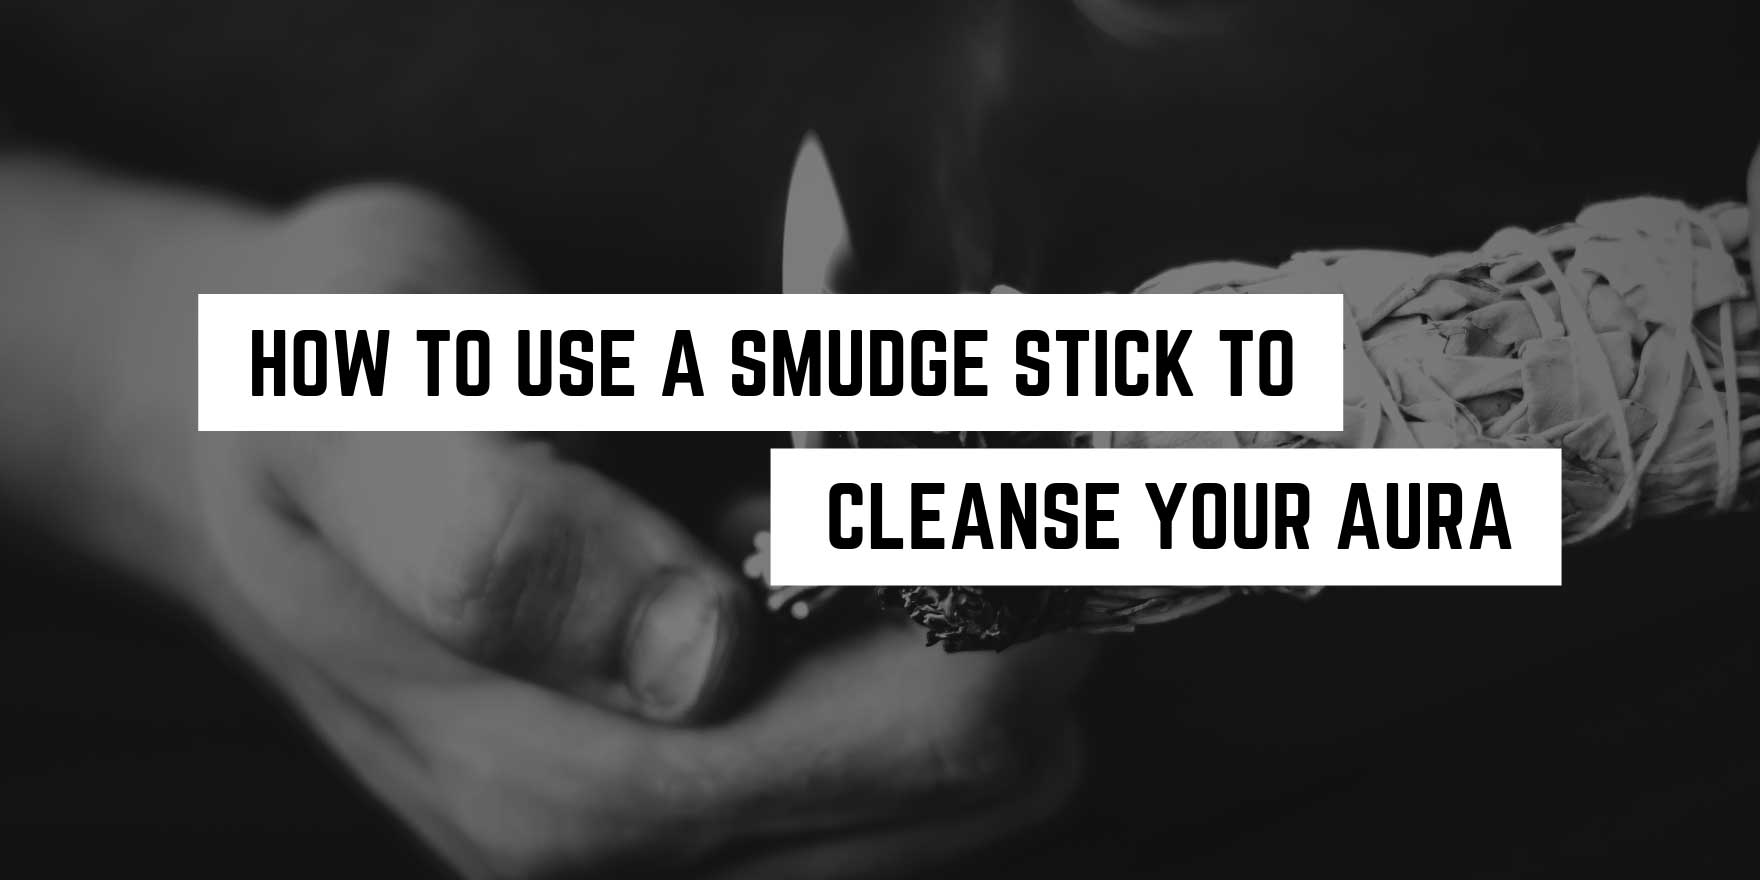 How to Use a Smudge Stick to Cleanse Your Aura